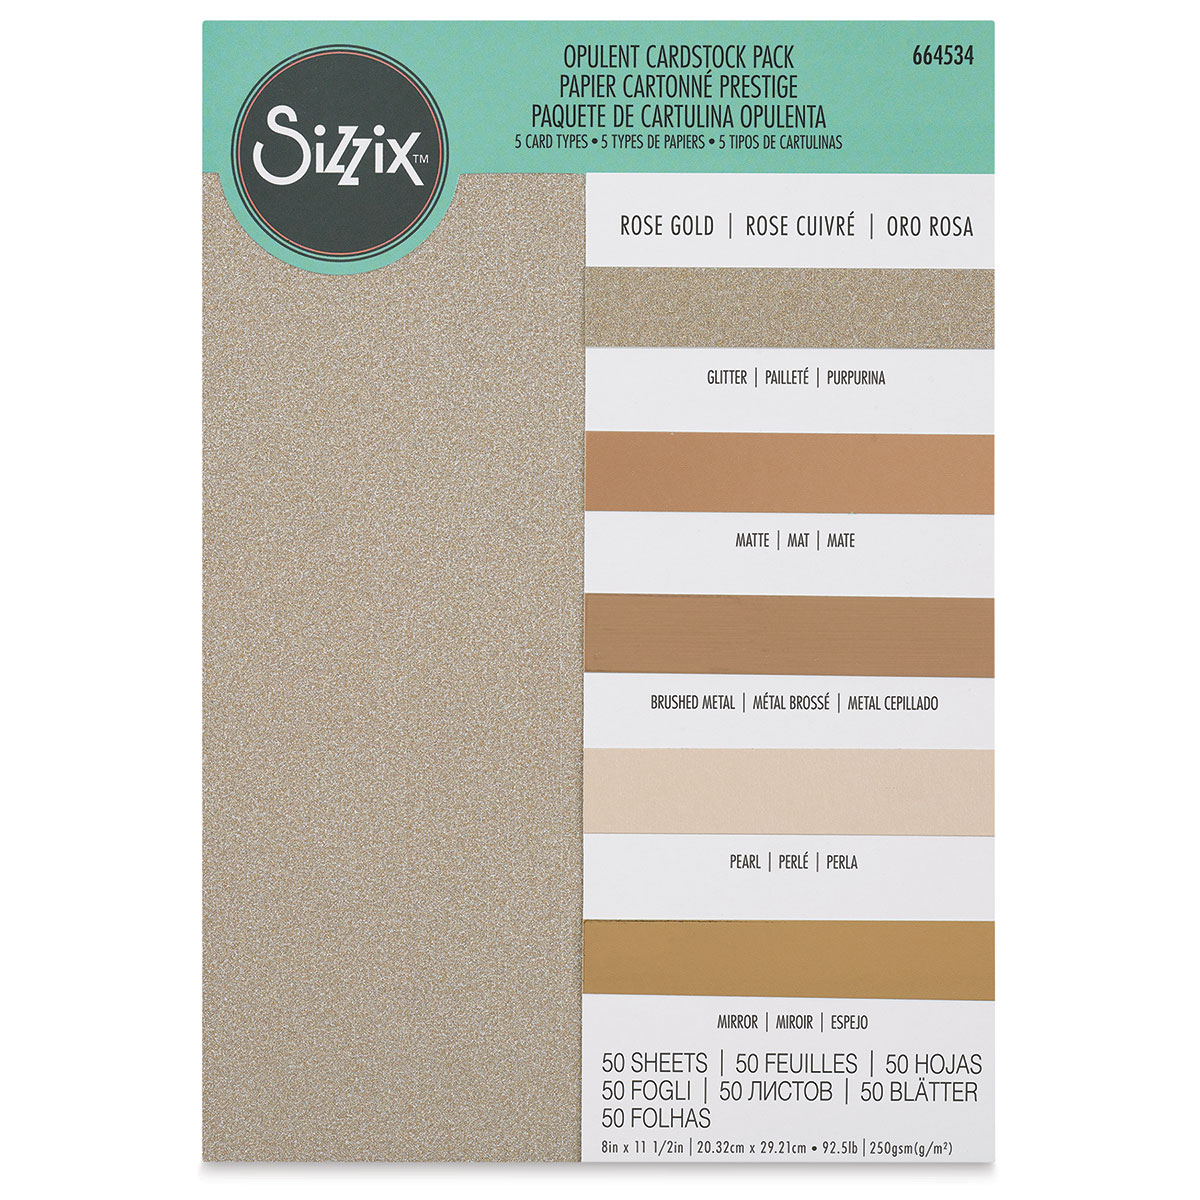 Rose Gold Sizzix Surfaces Opulent Cardstock Pack of 50 sheets of assorted  textures like glitter, matte, pearl. Available in store and online -  Keepsakes by K - Stationery supplies, paper crafts and